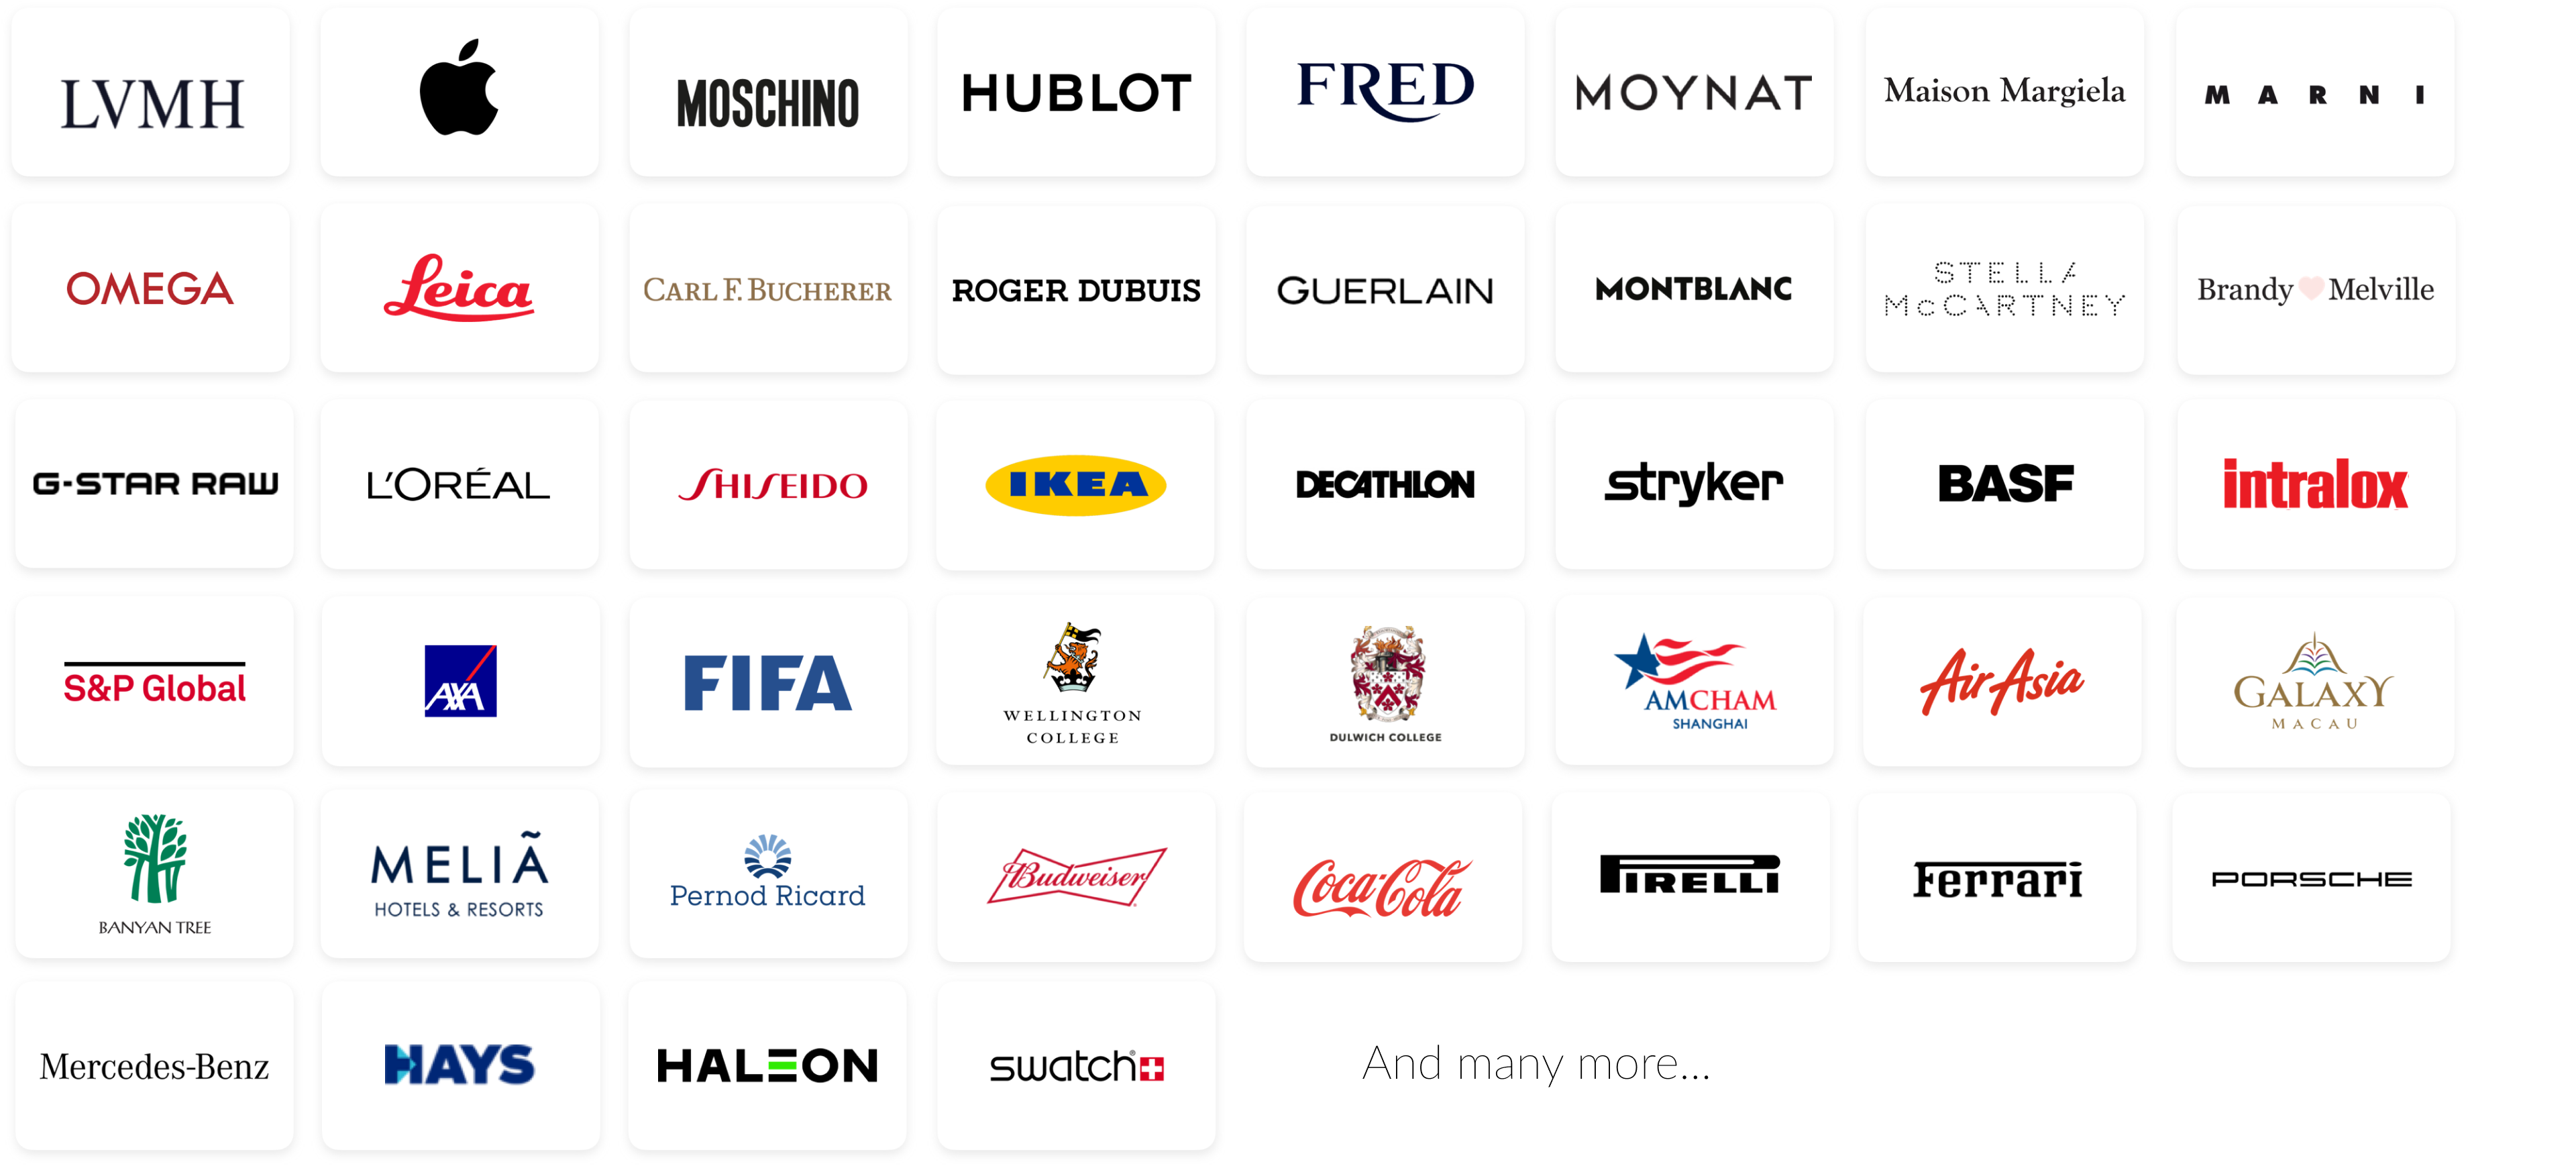 ITC has worked with many Fortune 500 brands